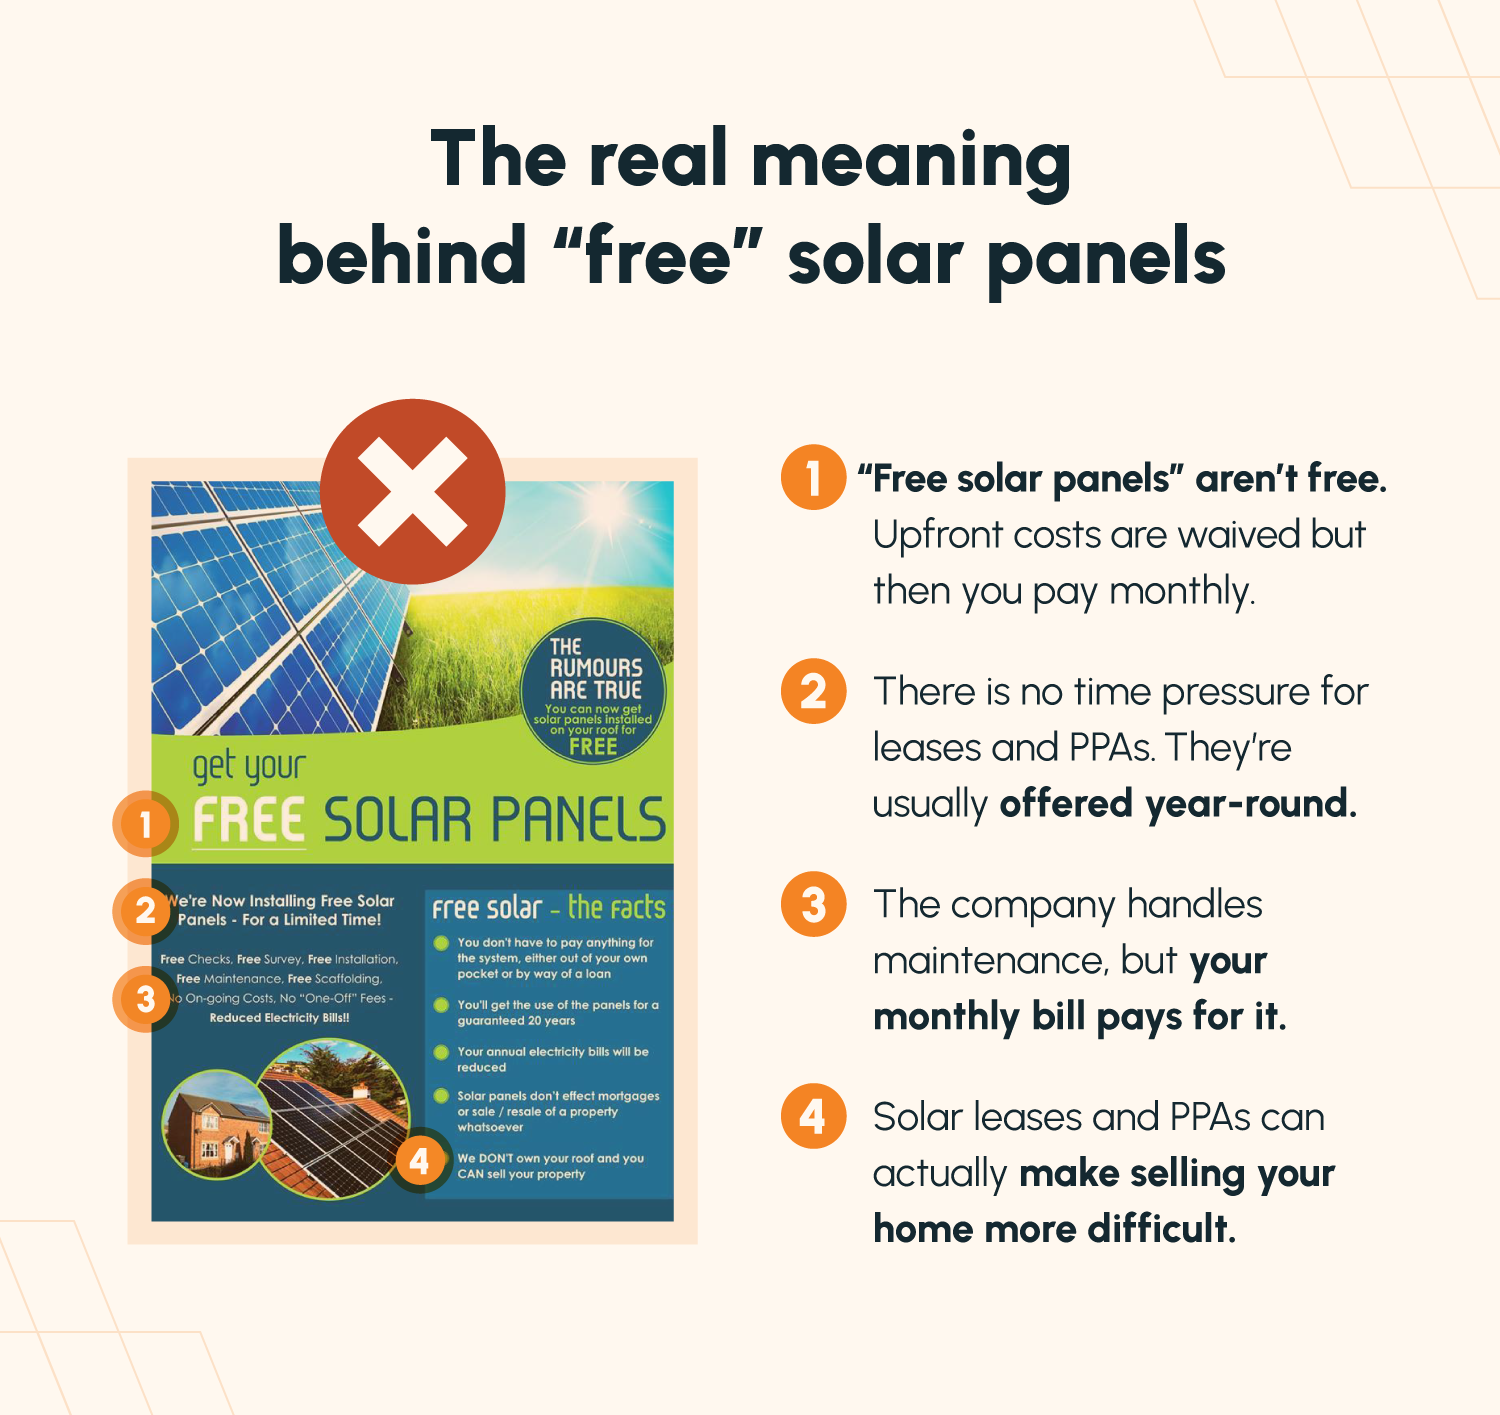 A breakdown of a “free solar panels” ad showing how this sales pitch is often misleading